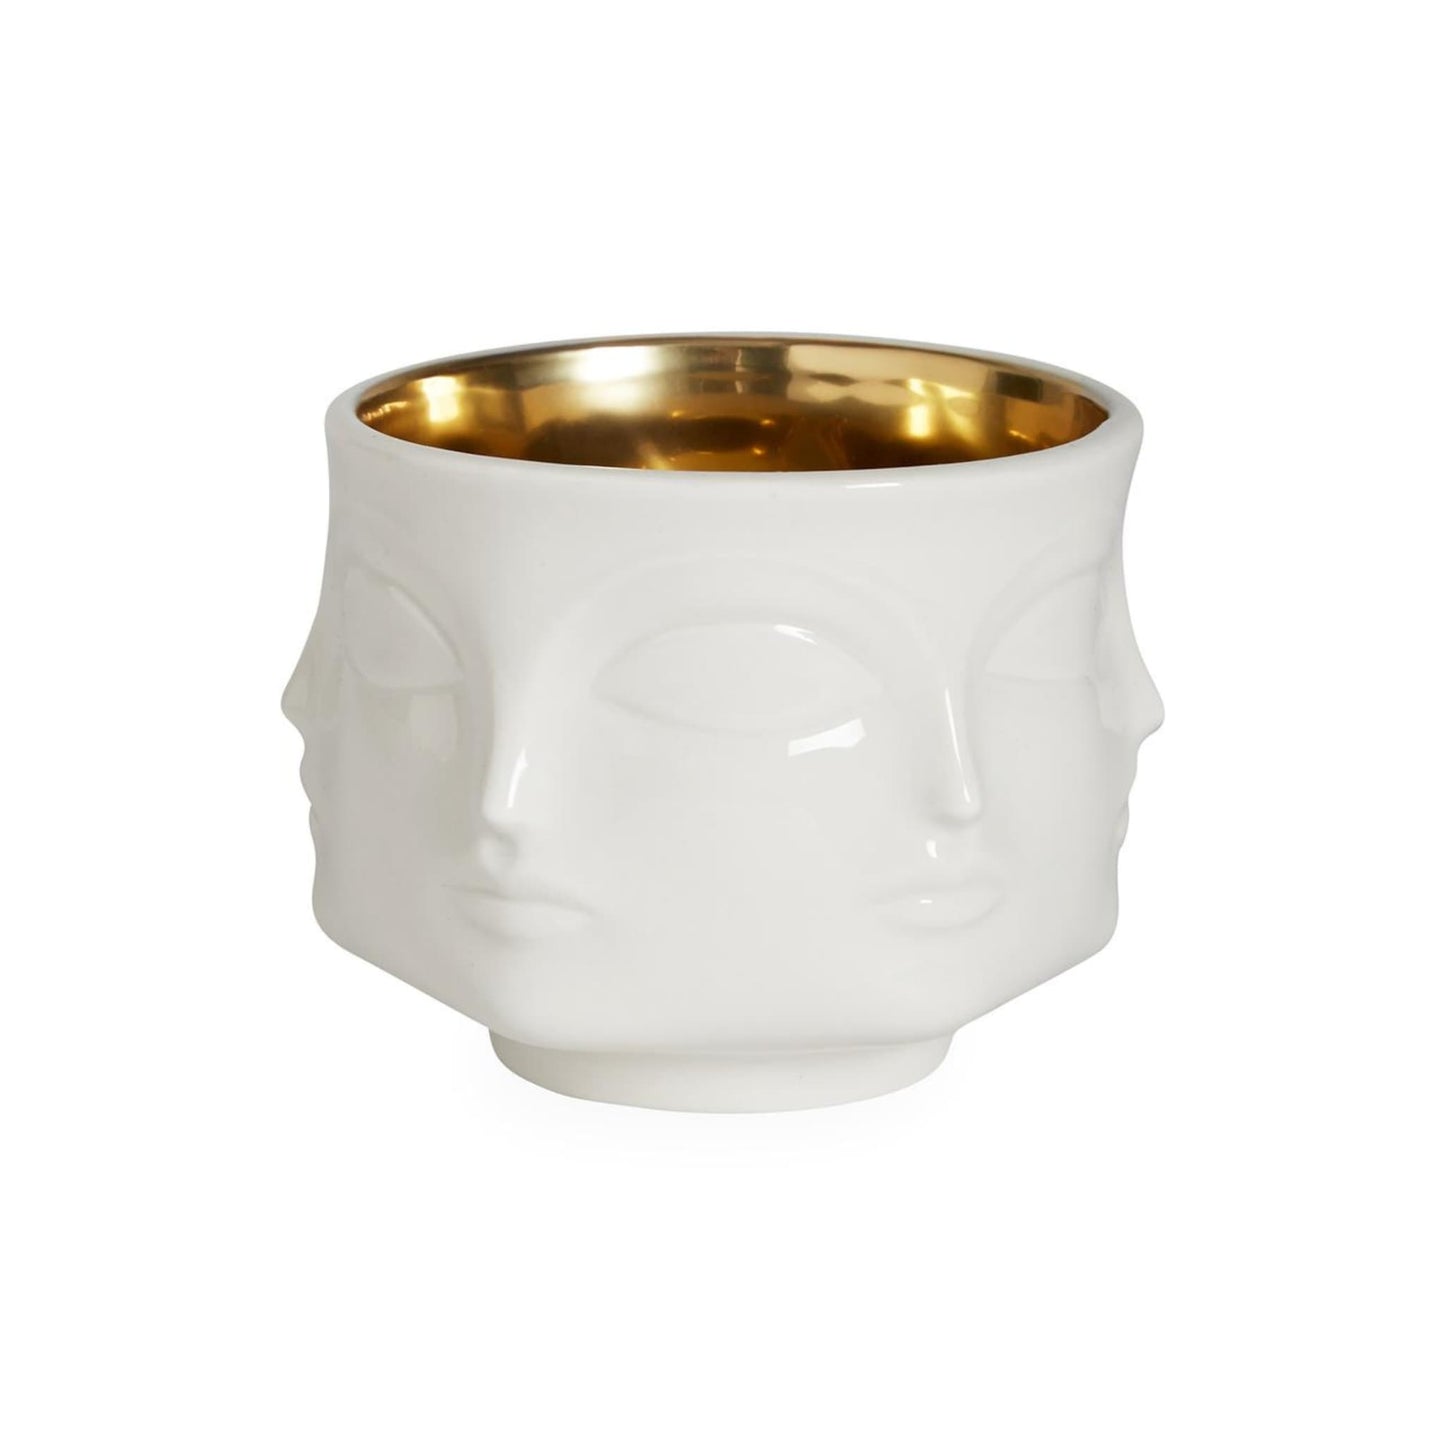 Muse condiment bowl gold